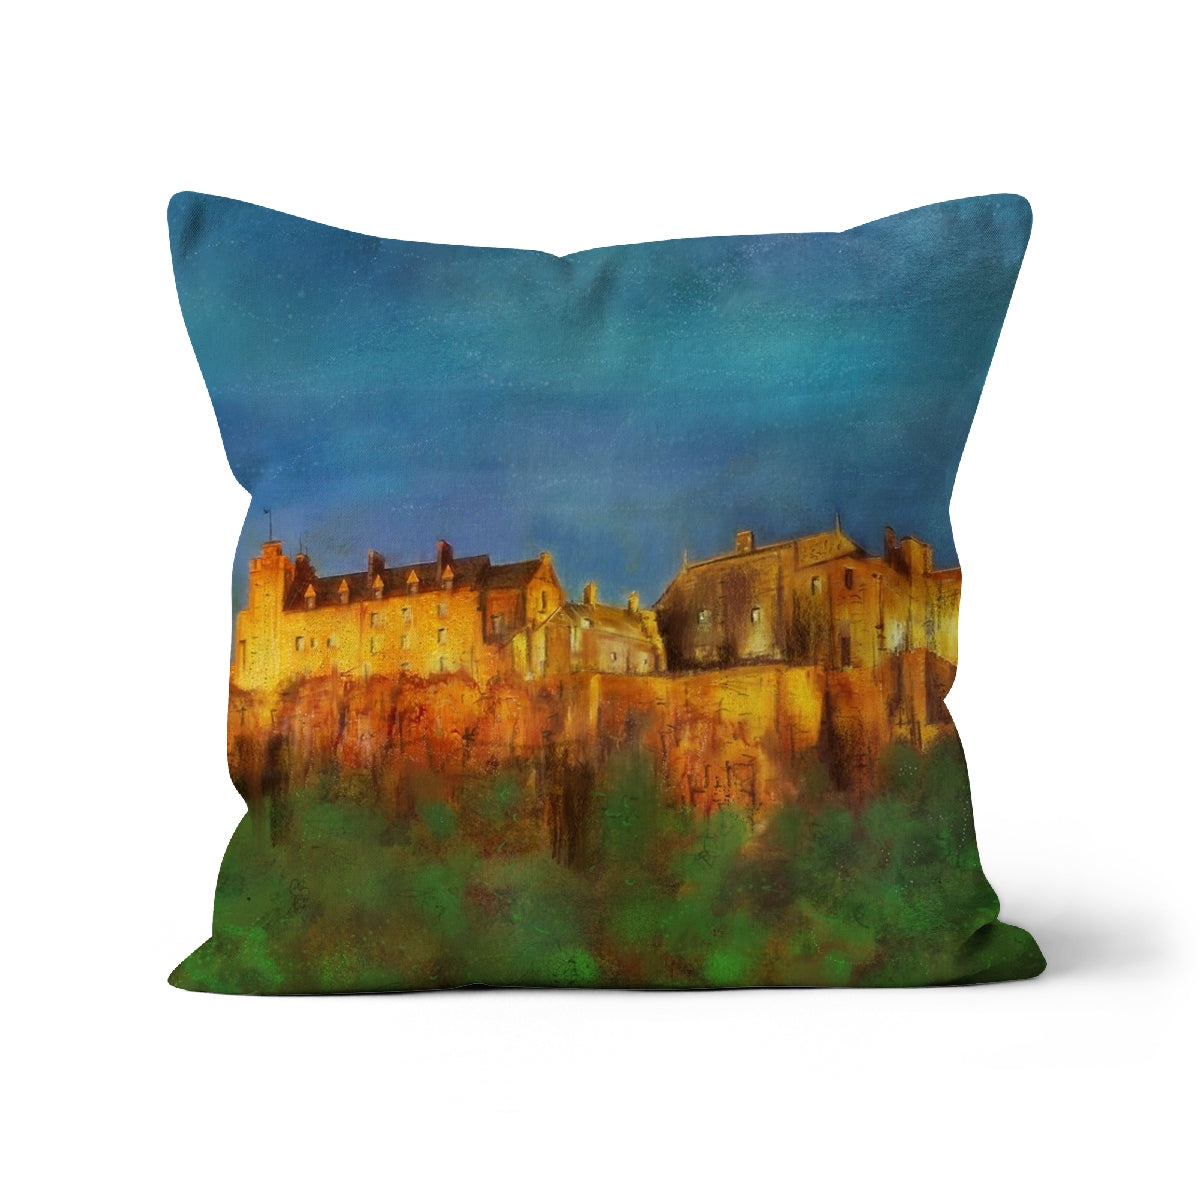 Stirling Castle Art Gifts Cushion-Cushions-Historic & Iconic Scotland Art Gallery-Linen-12"x12"-Paintings, Prints, Homeware, Art Gifts From Scotland By Scottish Artist Kevin Hunter